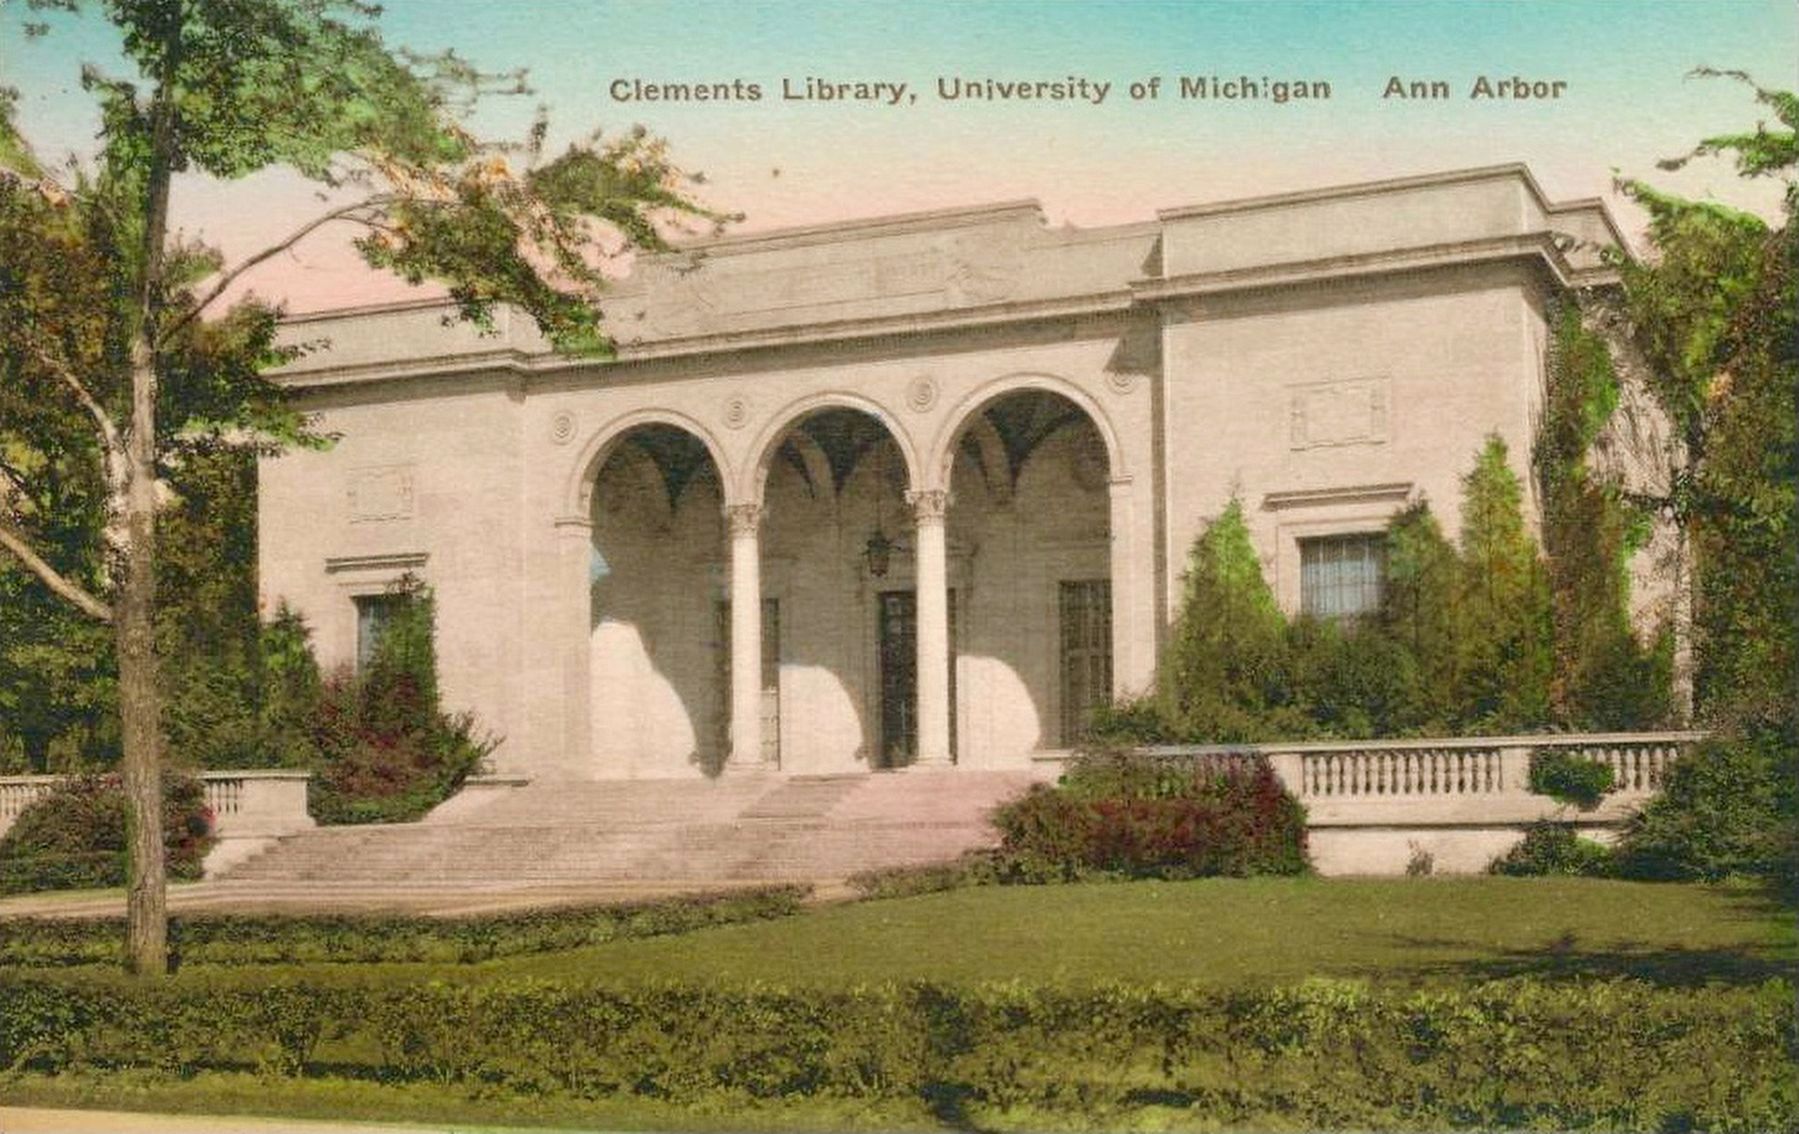 <i>Clements Library, University of Michigan   Ann Arbor</i> image. Click for full size.